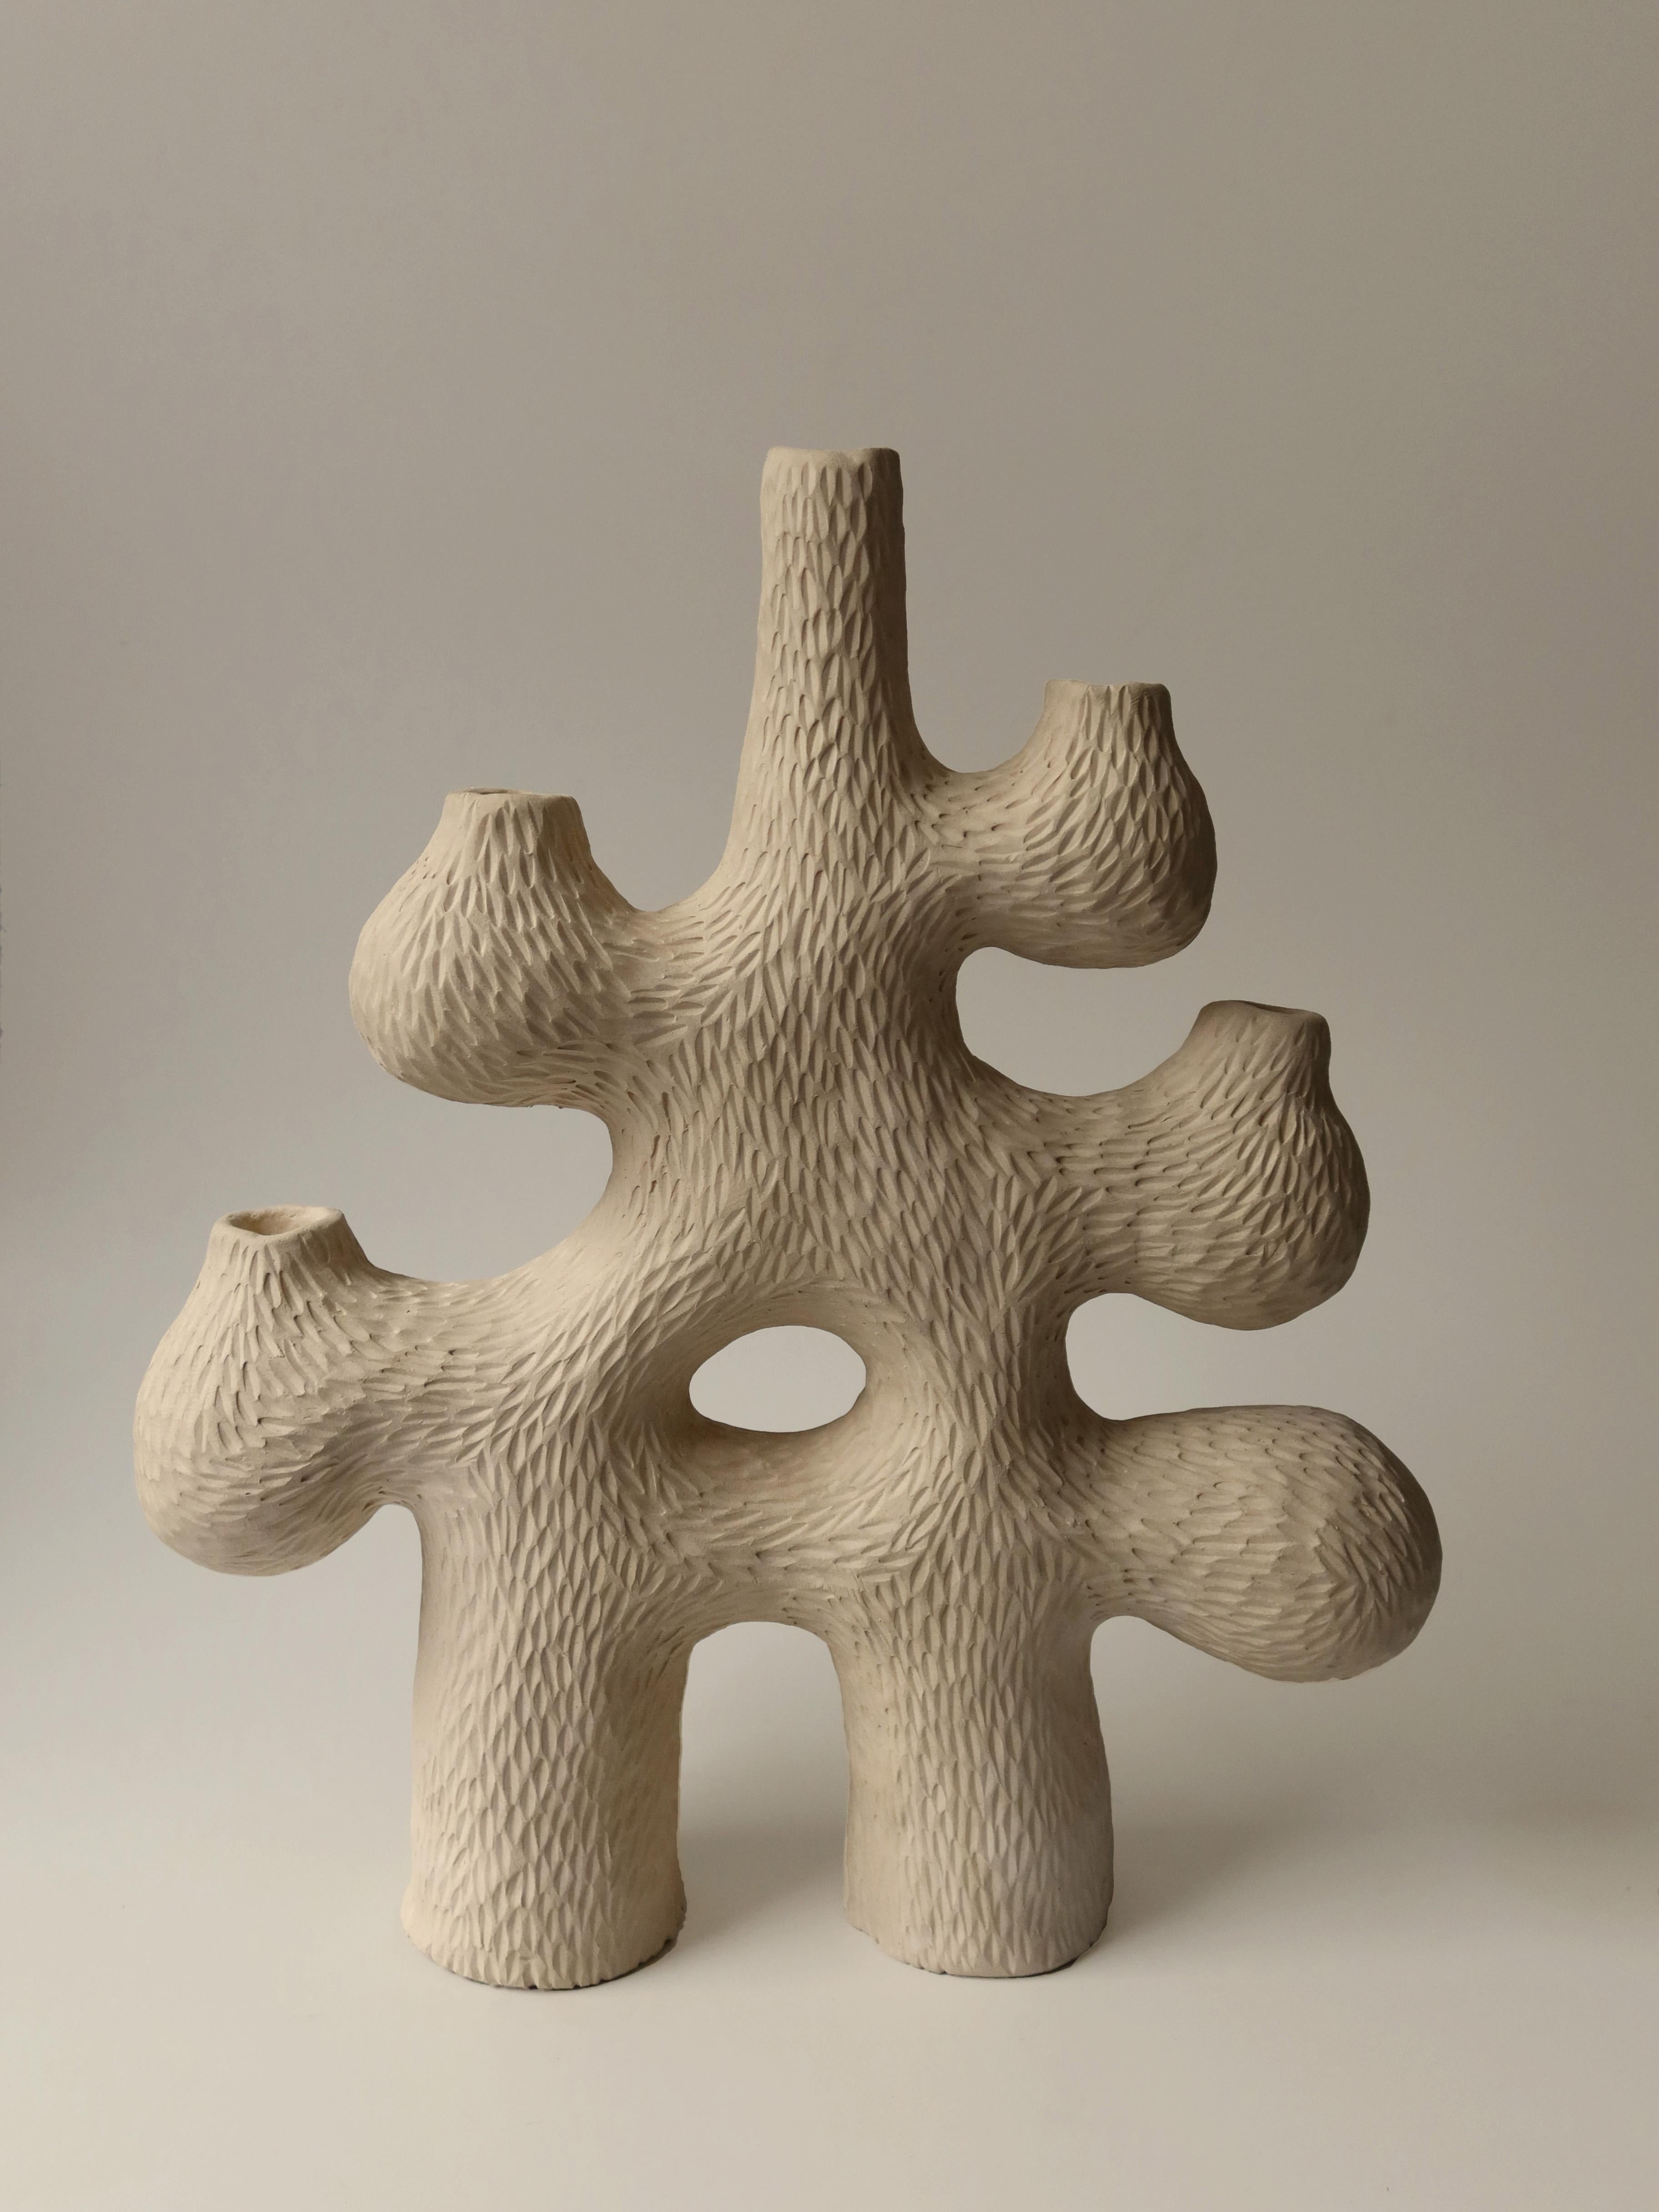 Forest candelabra no.4 by Jan Ernst
Dimensions: W 42 x D 12 x H 42 cm
Materials: White stoneware, Black clay, Terracotta

Glazed to client specification.


Jan Ernst’s work takes on an experimental approach, as he prefers making bespoke